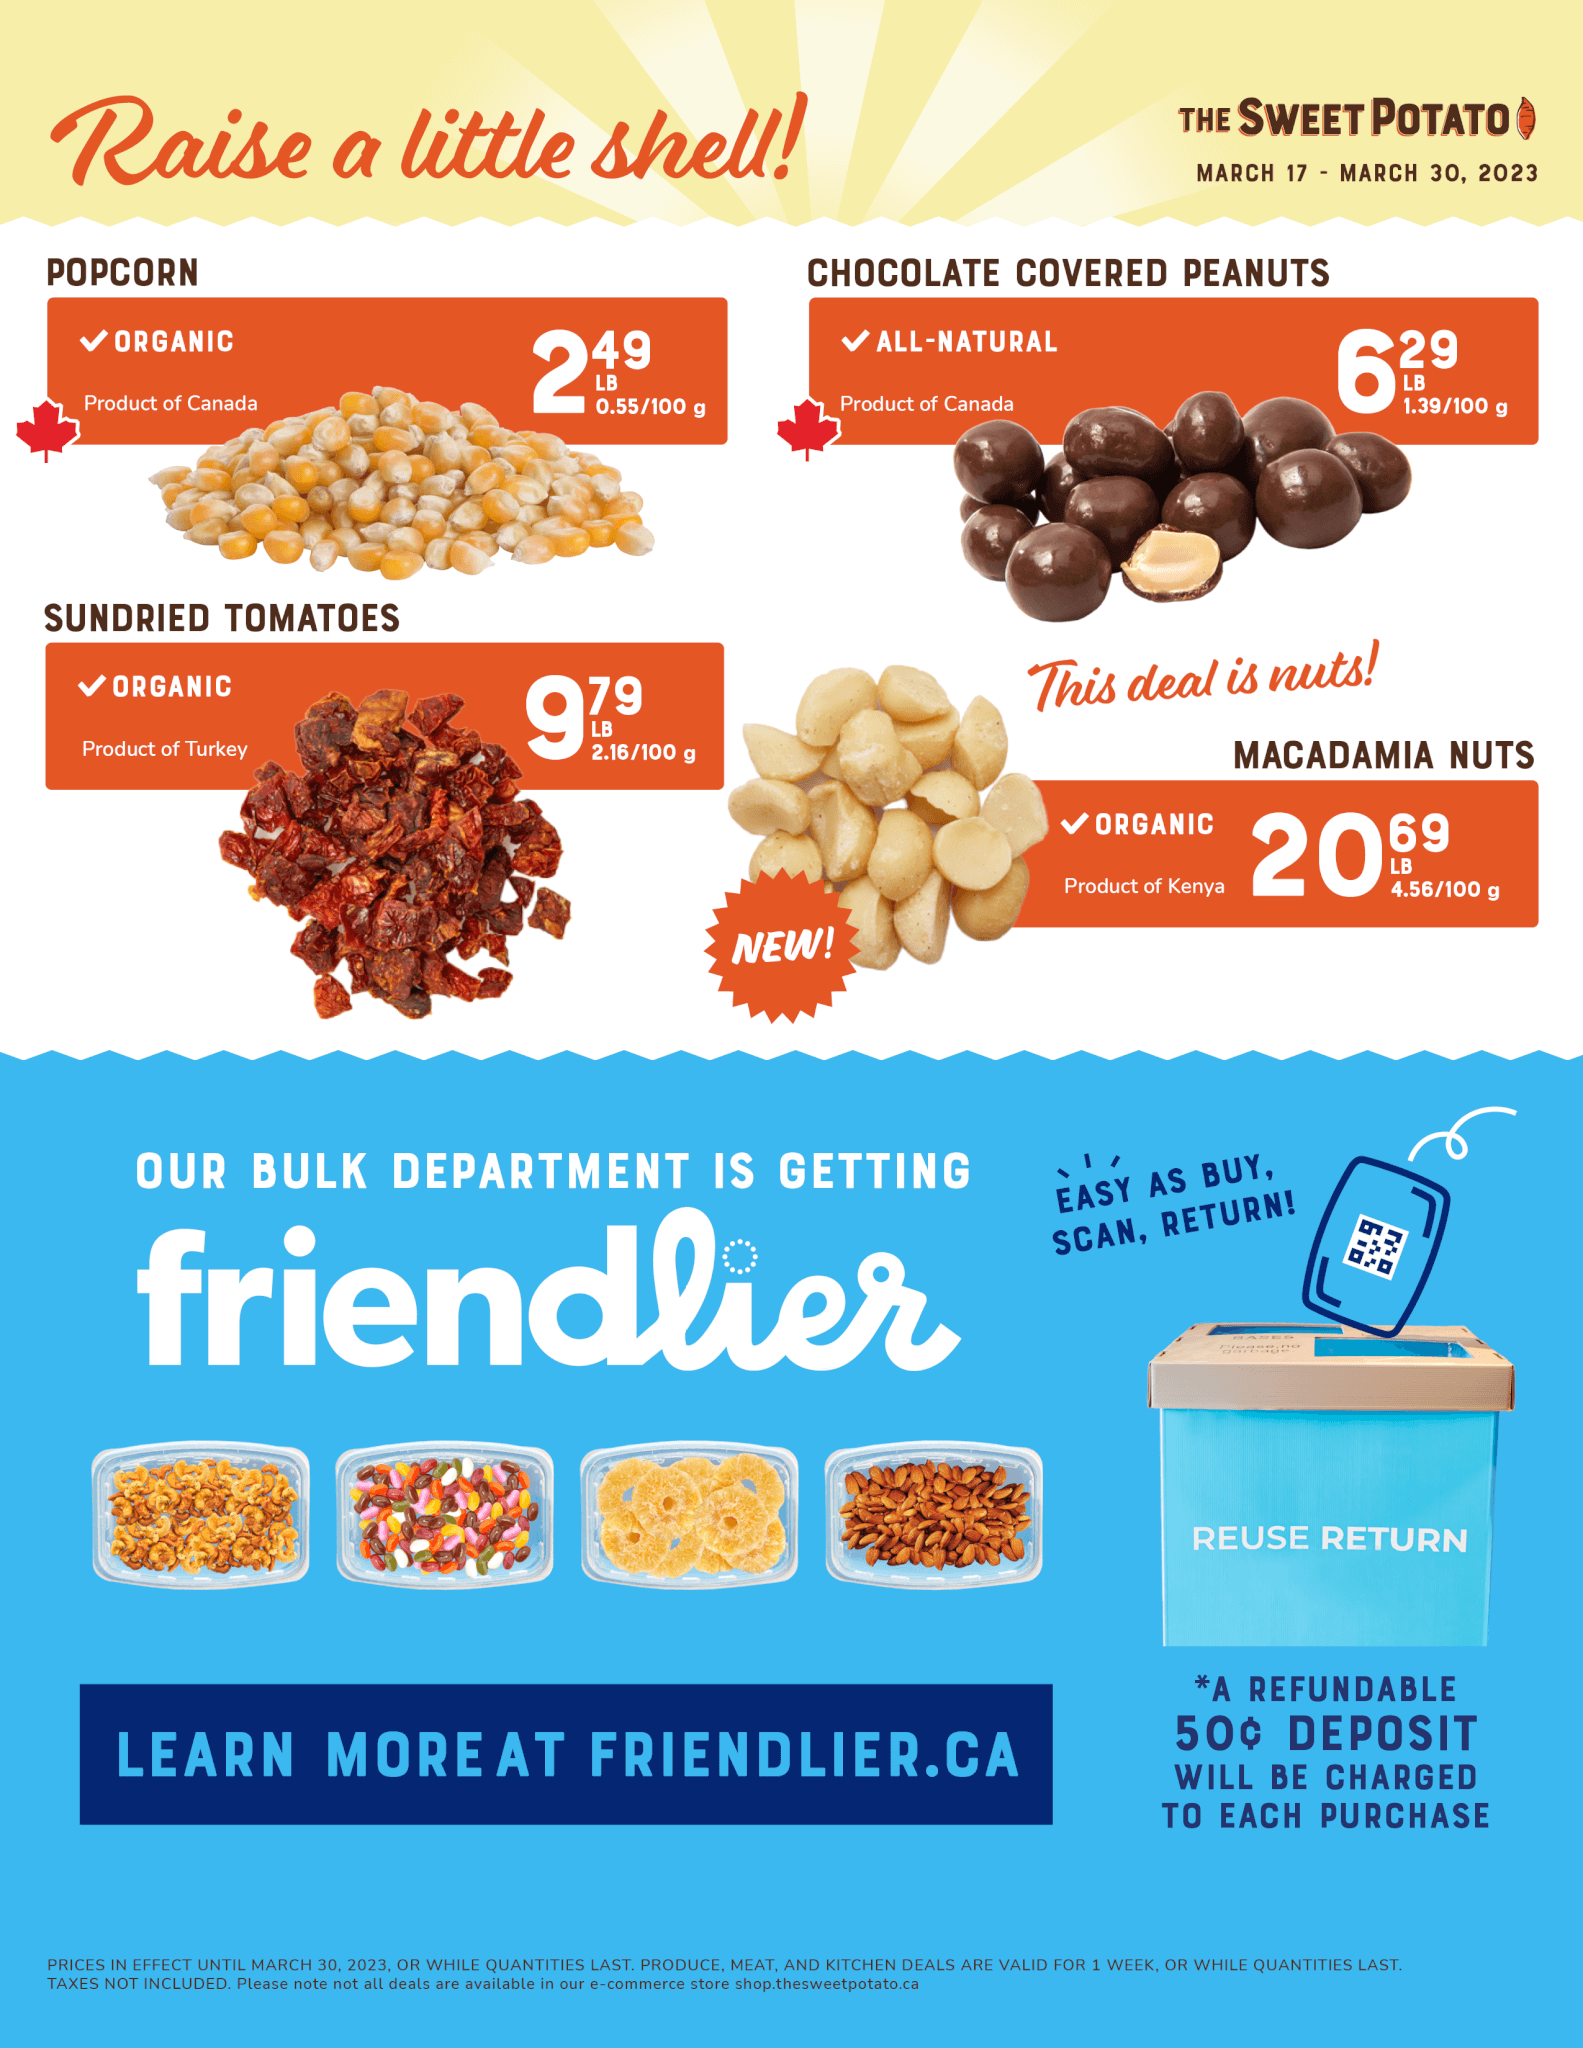 https://thesweetpotato.ca/wp-content/uploads/2023/03/TSP-Full-flyer-March-17-v210.png